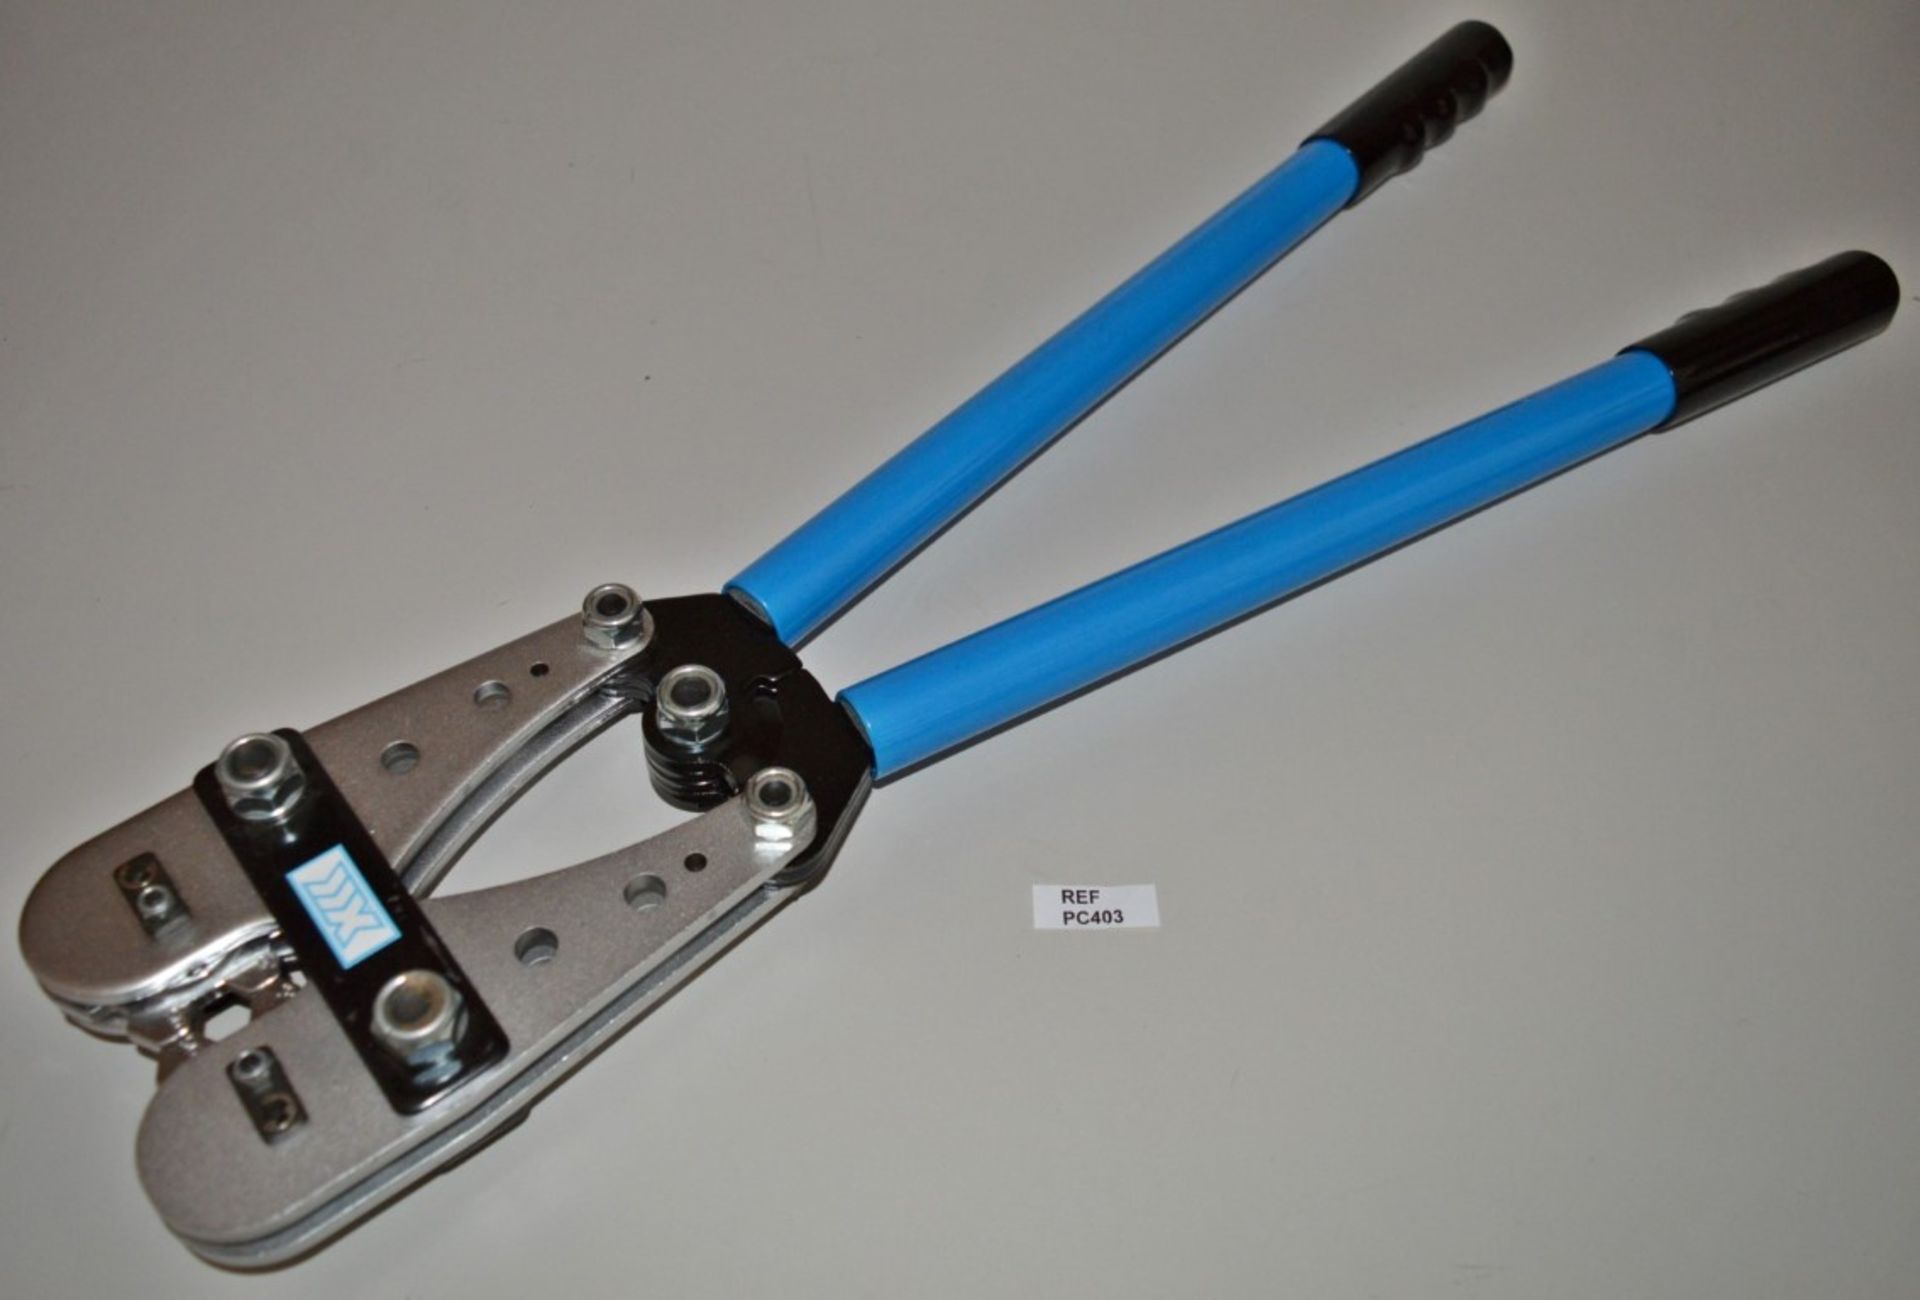 1 x HD Copper Tube Terminal Crimp Tool With Adjustable Hex - 62cm Length - XXX Branded - New and - Image 6 of 7